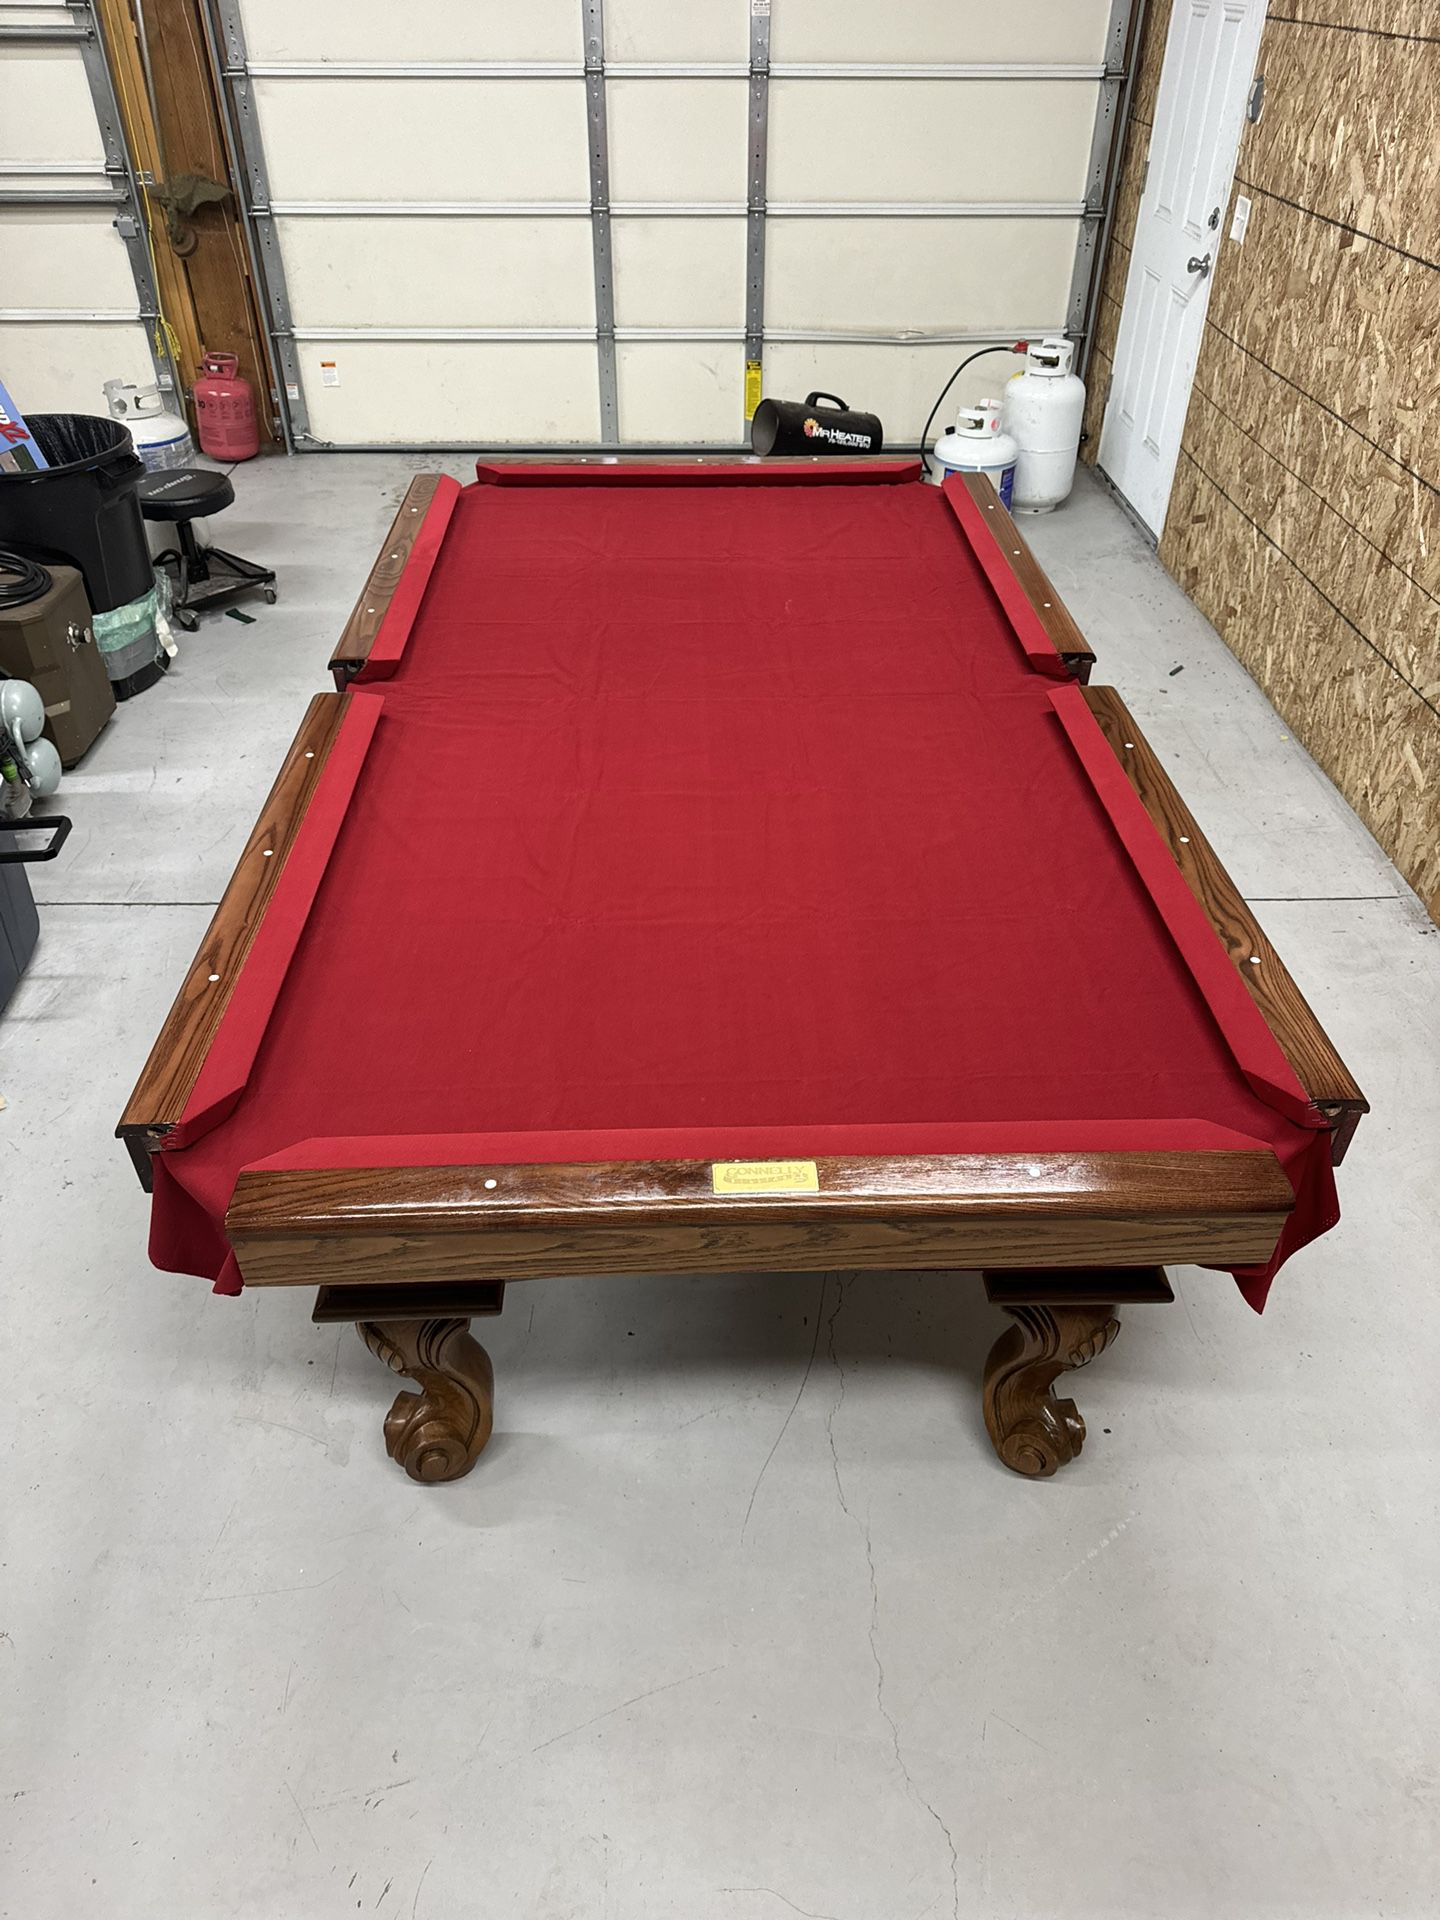 Connelly 8 Ft Pool Table